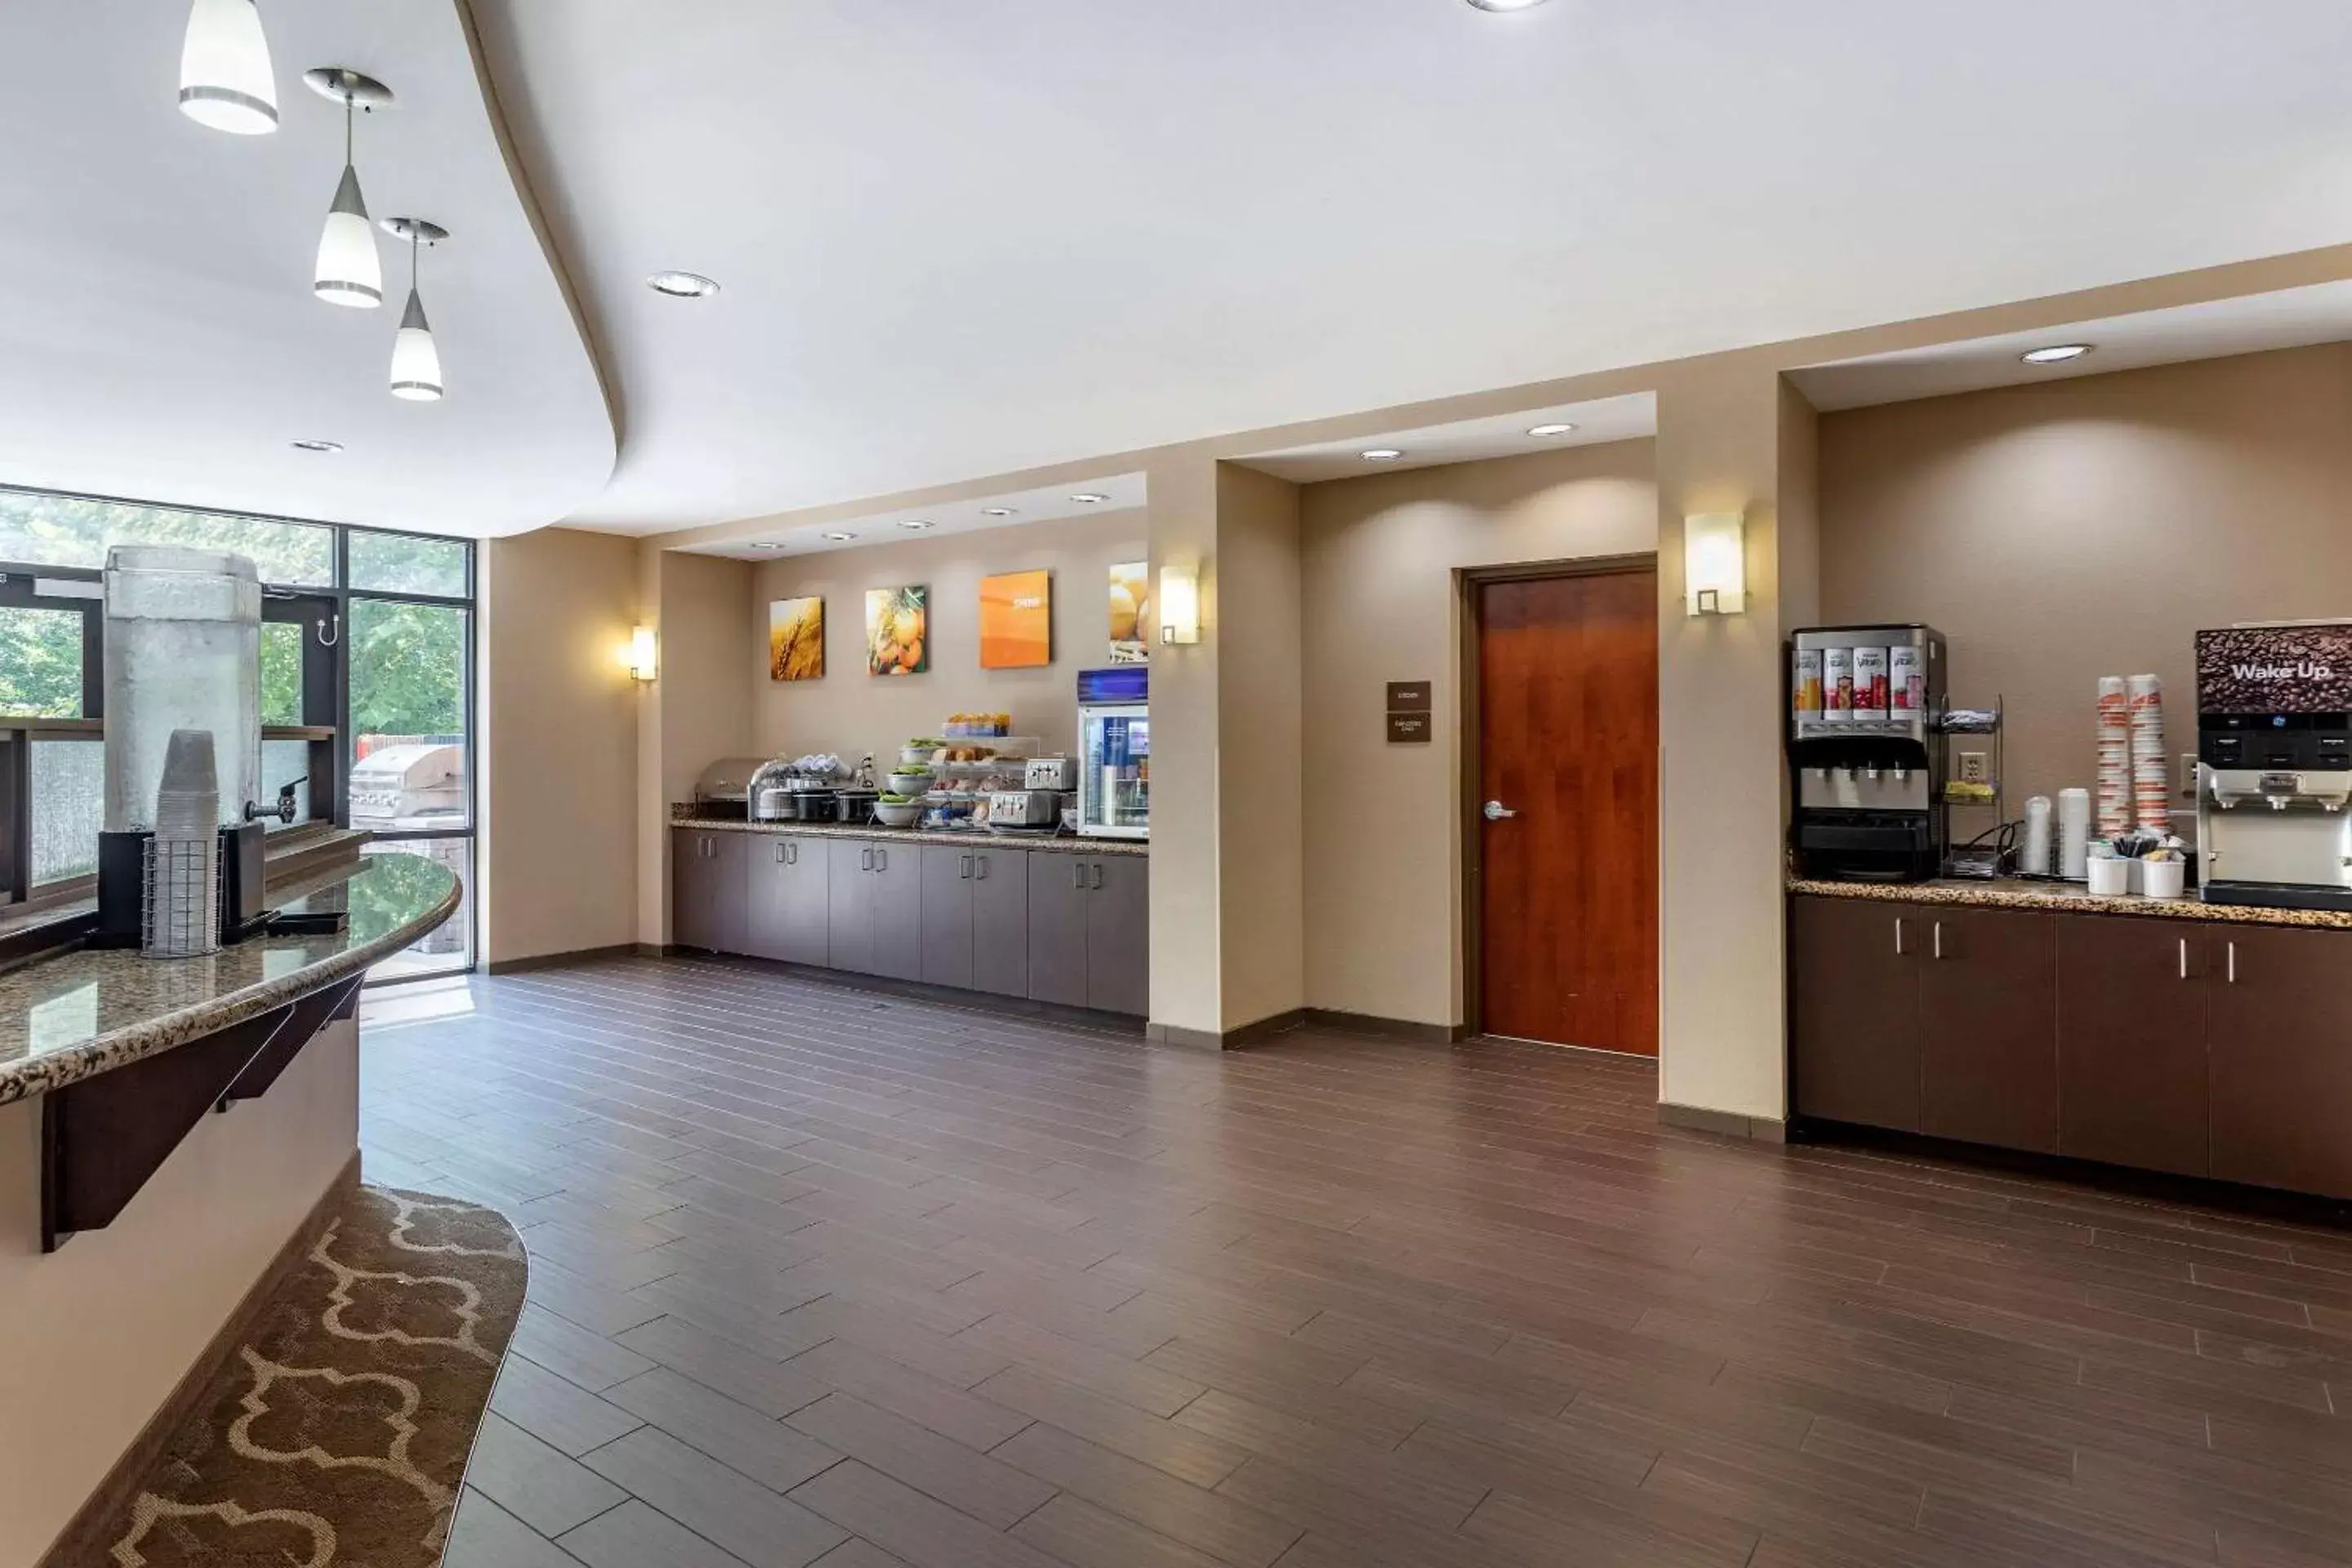 Restaurant/places to eat, Lobby/Reception in Comfort Suites Manchester